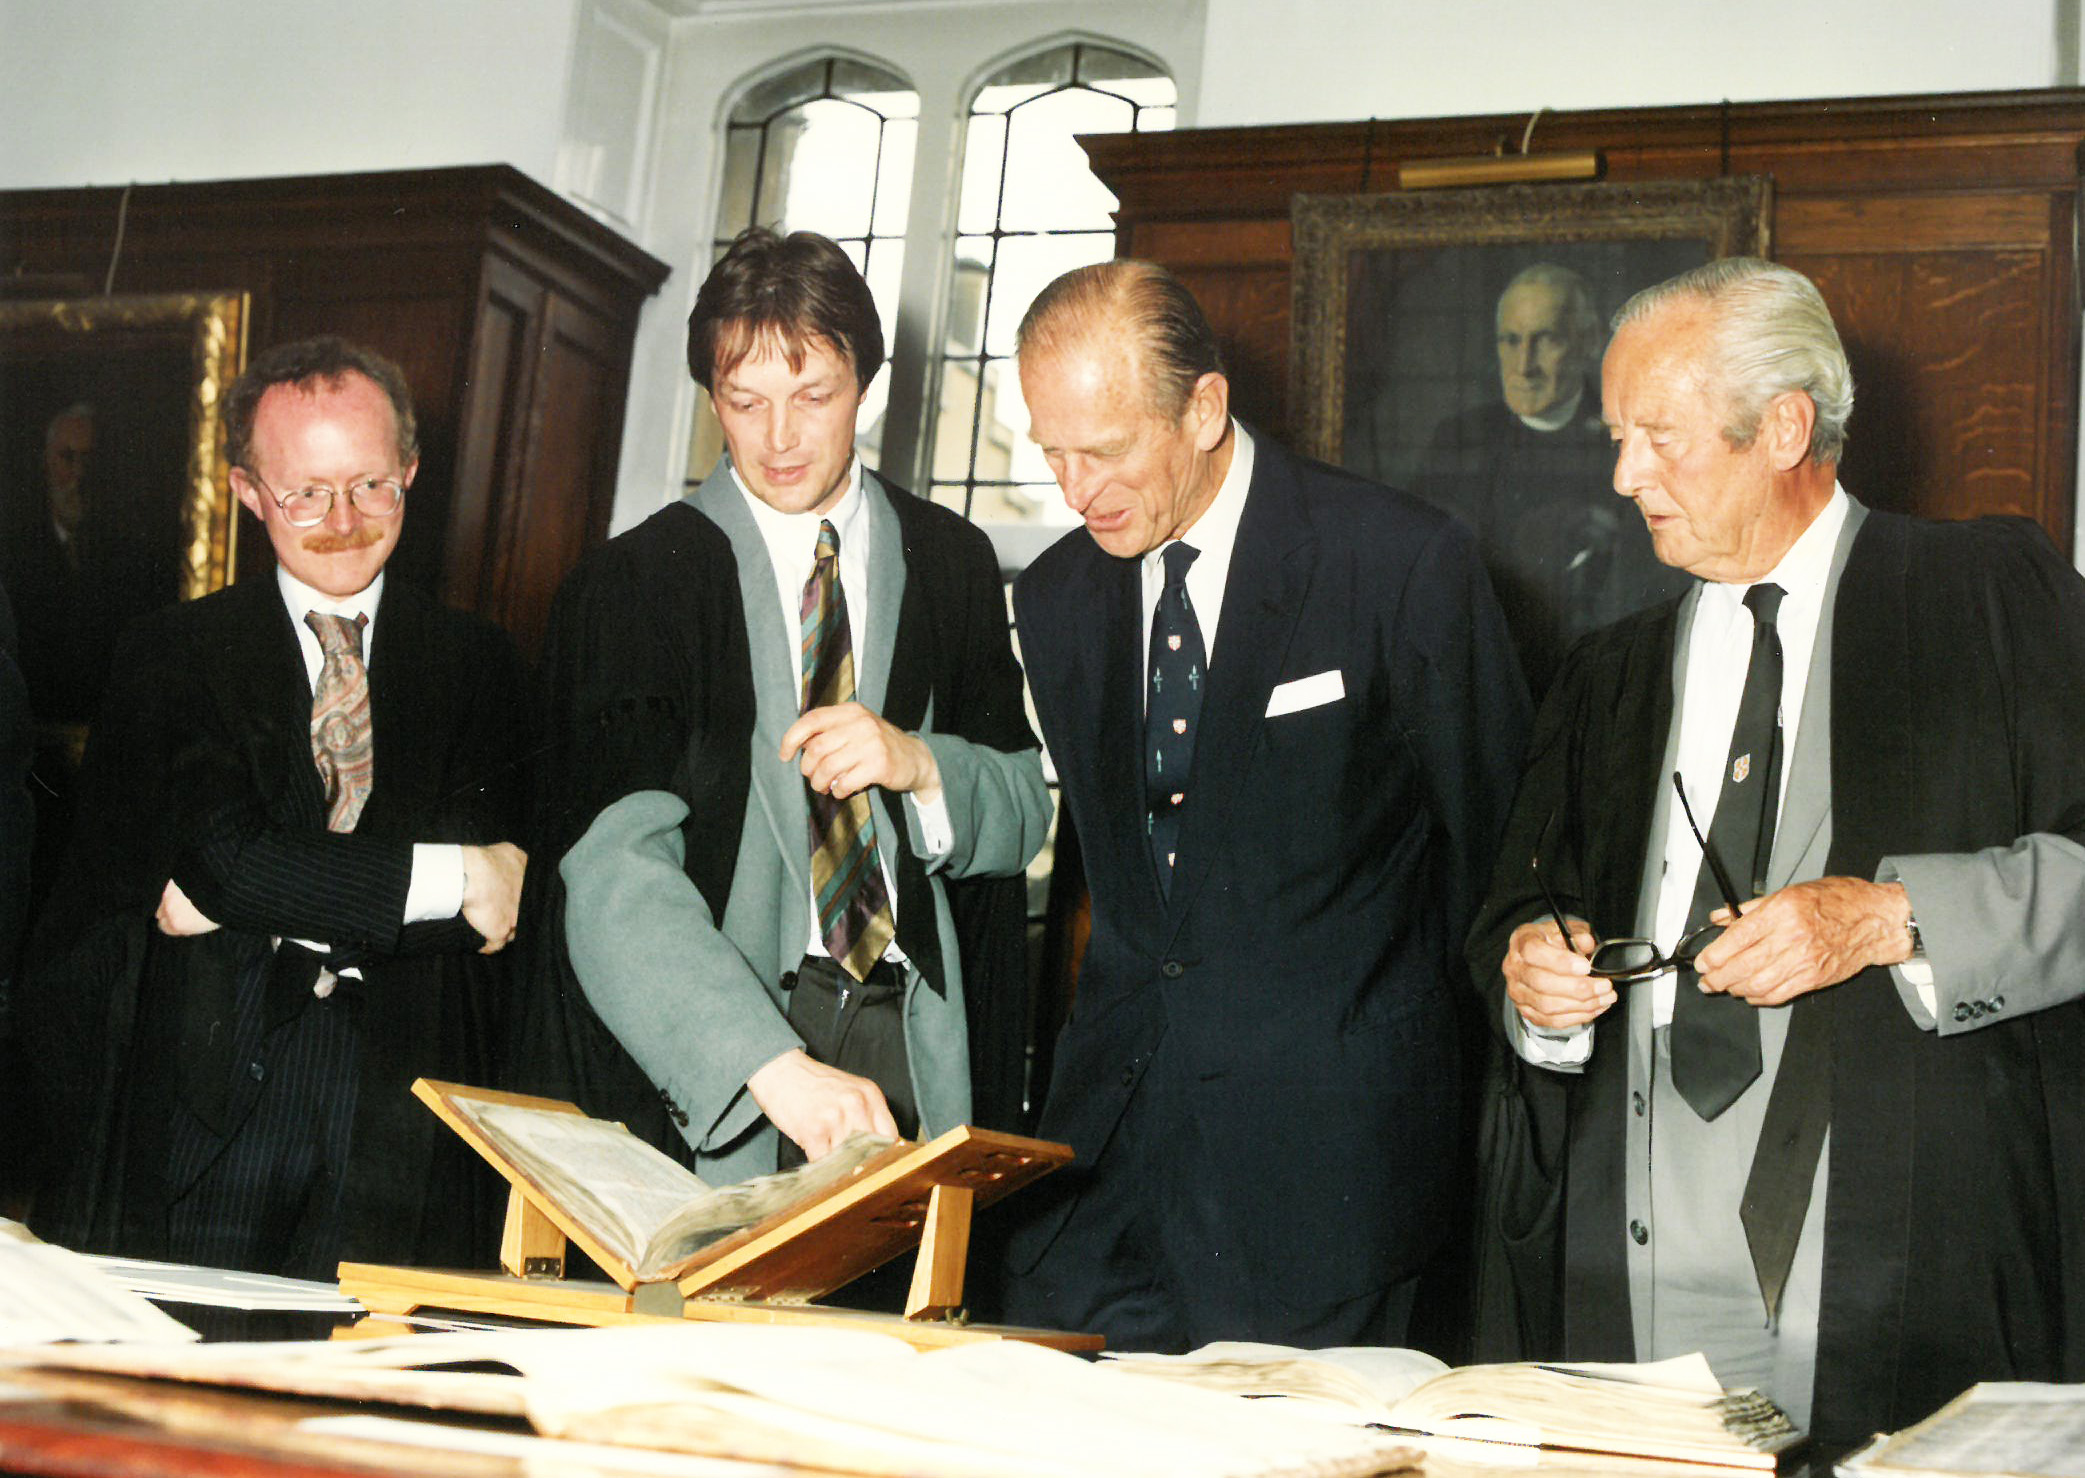 The Duke of Edinburgh visiting Sidney and looking a book alongside three others